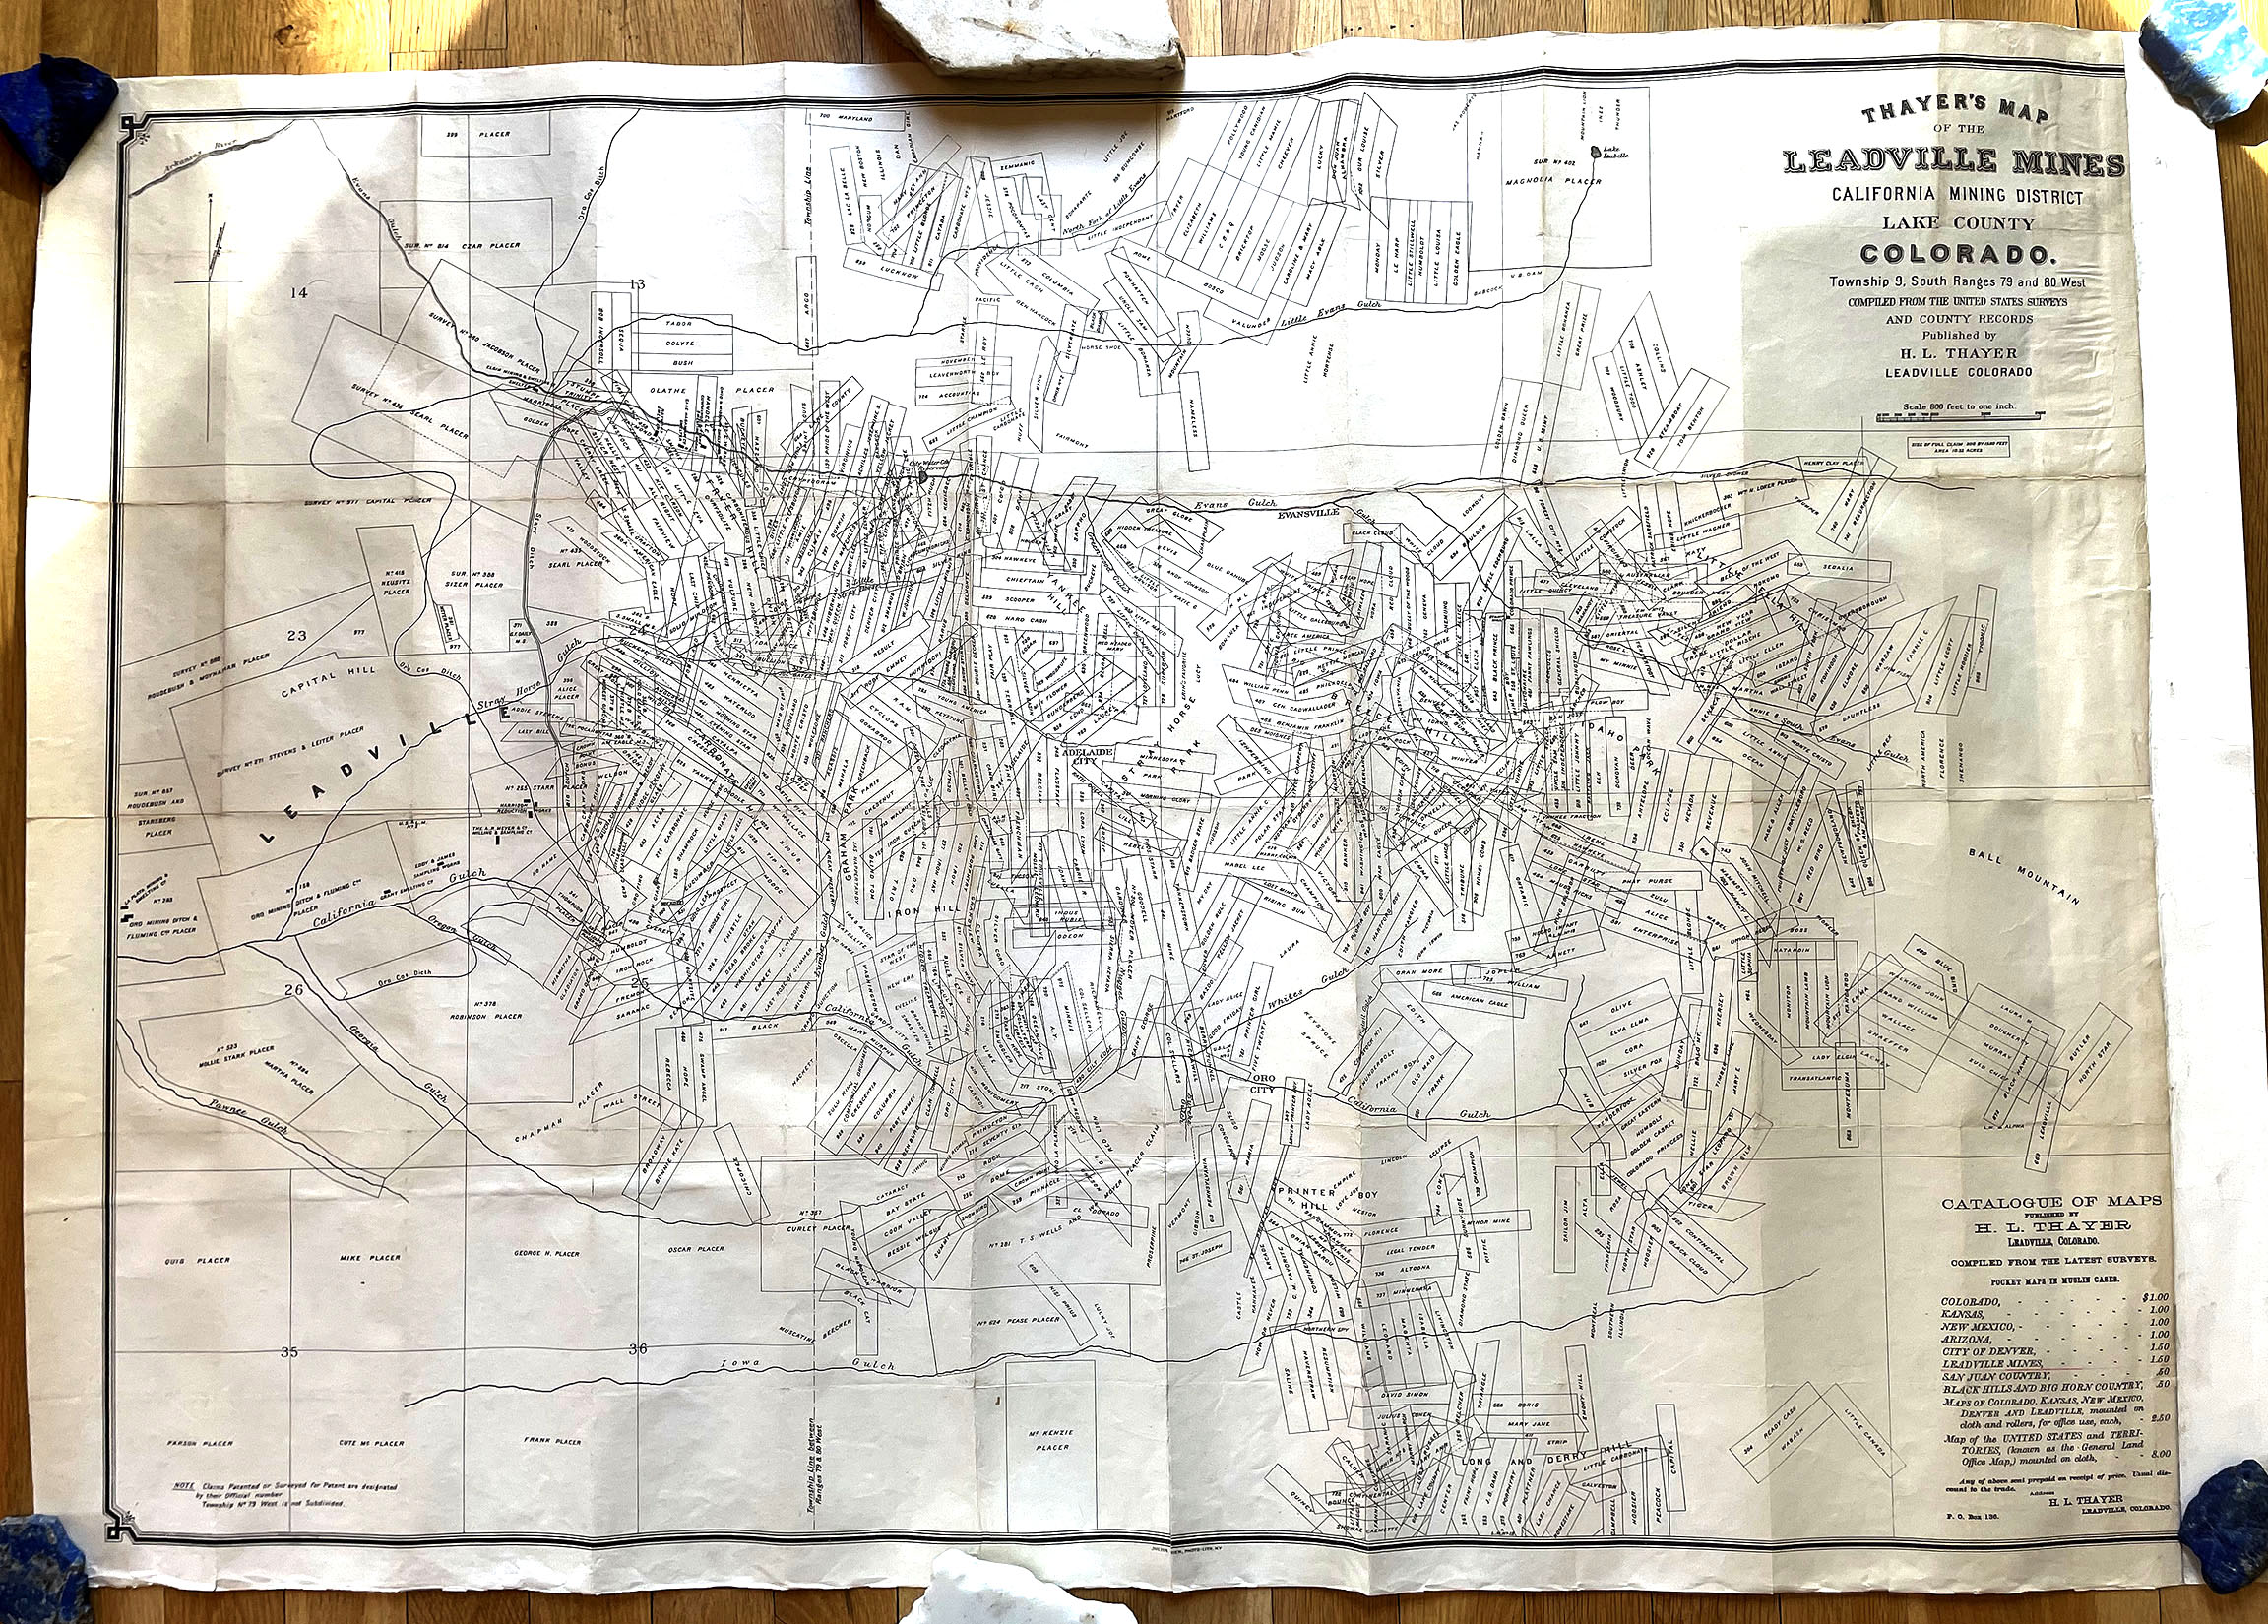 THAYER’S MAP OF LEADVILLE MINES COLORADO 1880